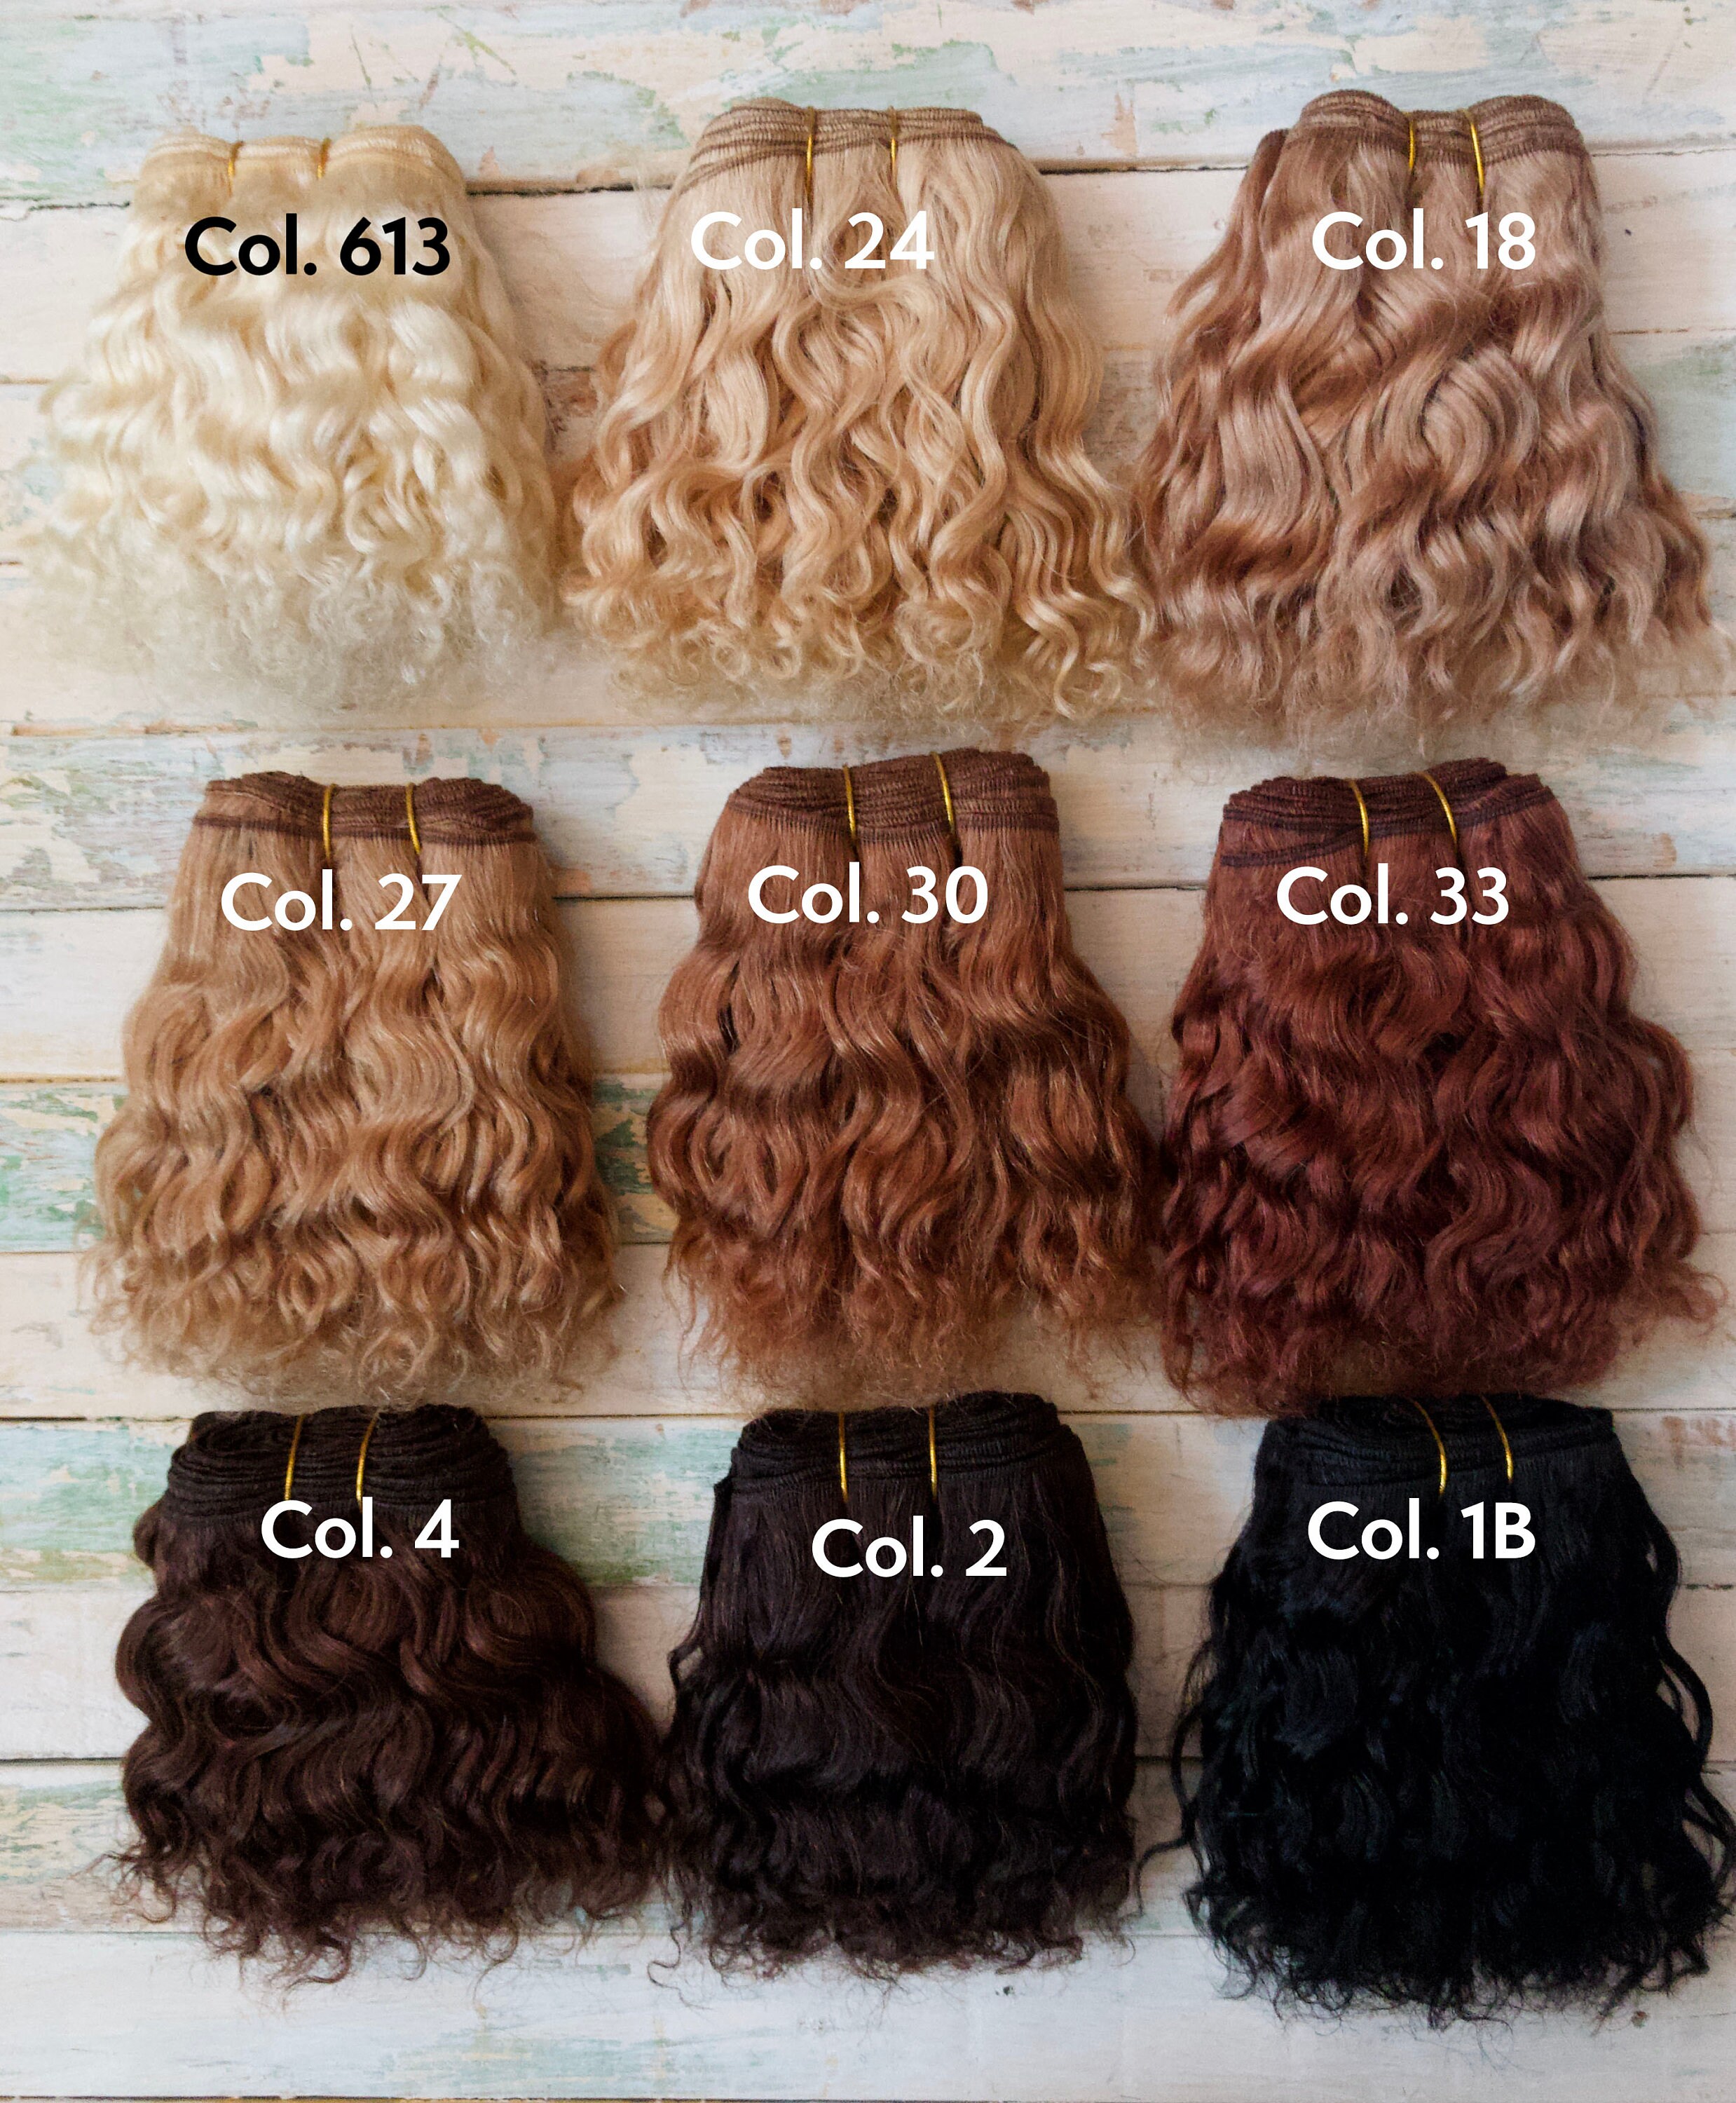 Natural Organic Dyeing Curly Wool for Felting Spinning Brown Knitting 2.1 Ounce Clean & Soft Many Colors Doll Hair Wall Hangings & Embellishments T.F GHG 100% Natural Wool Blending 